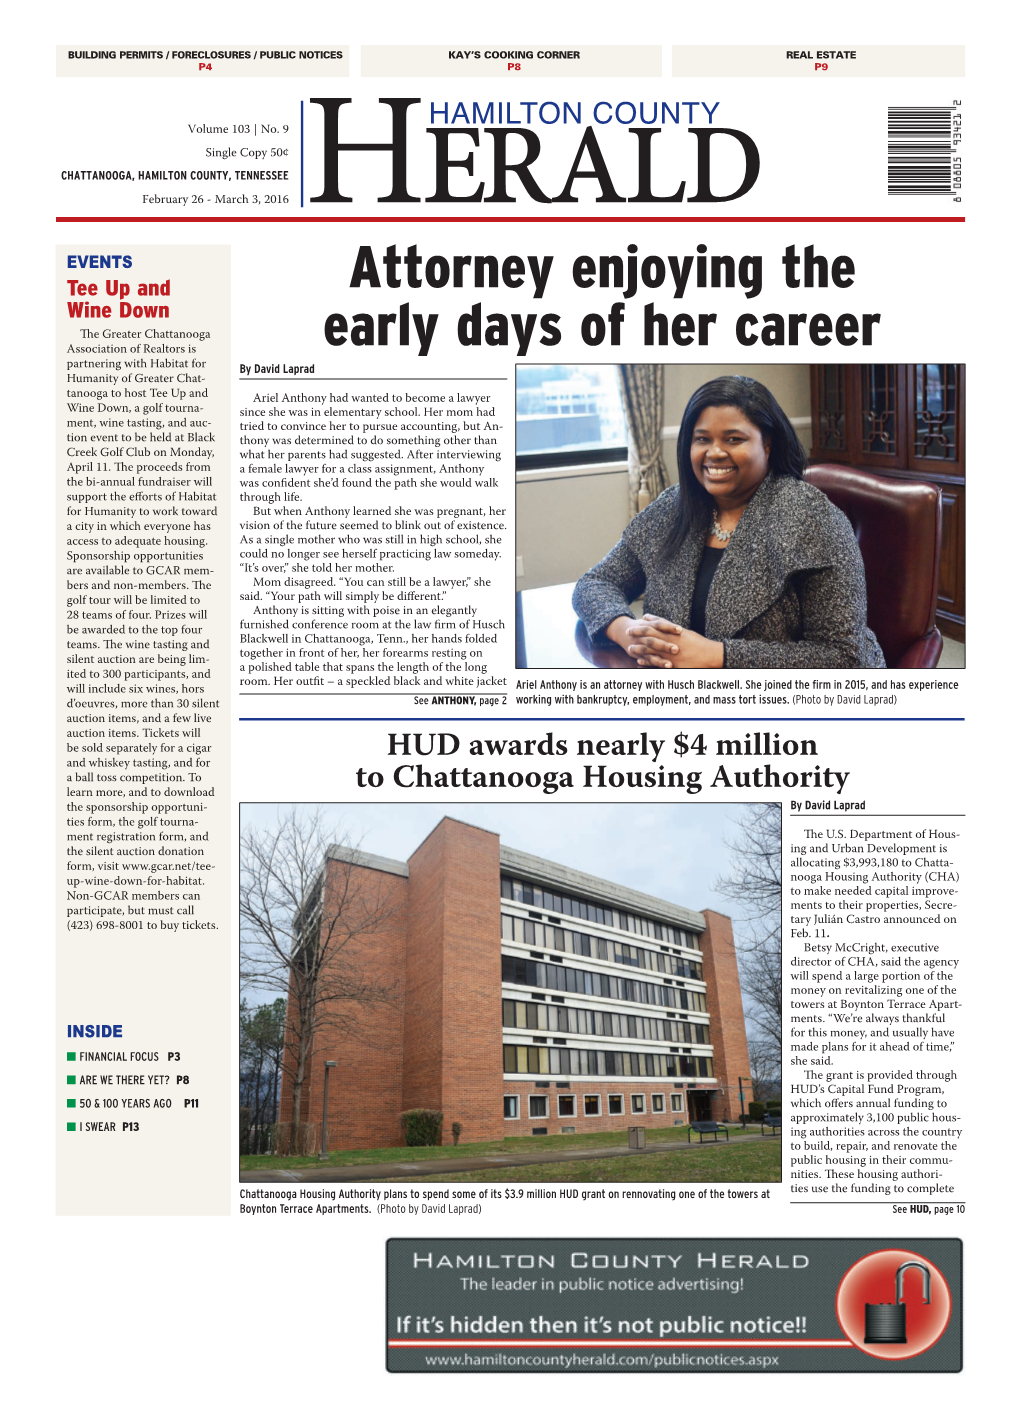 February 26, 2016 Issue